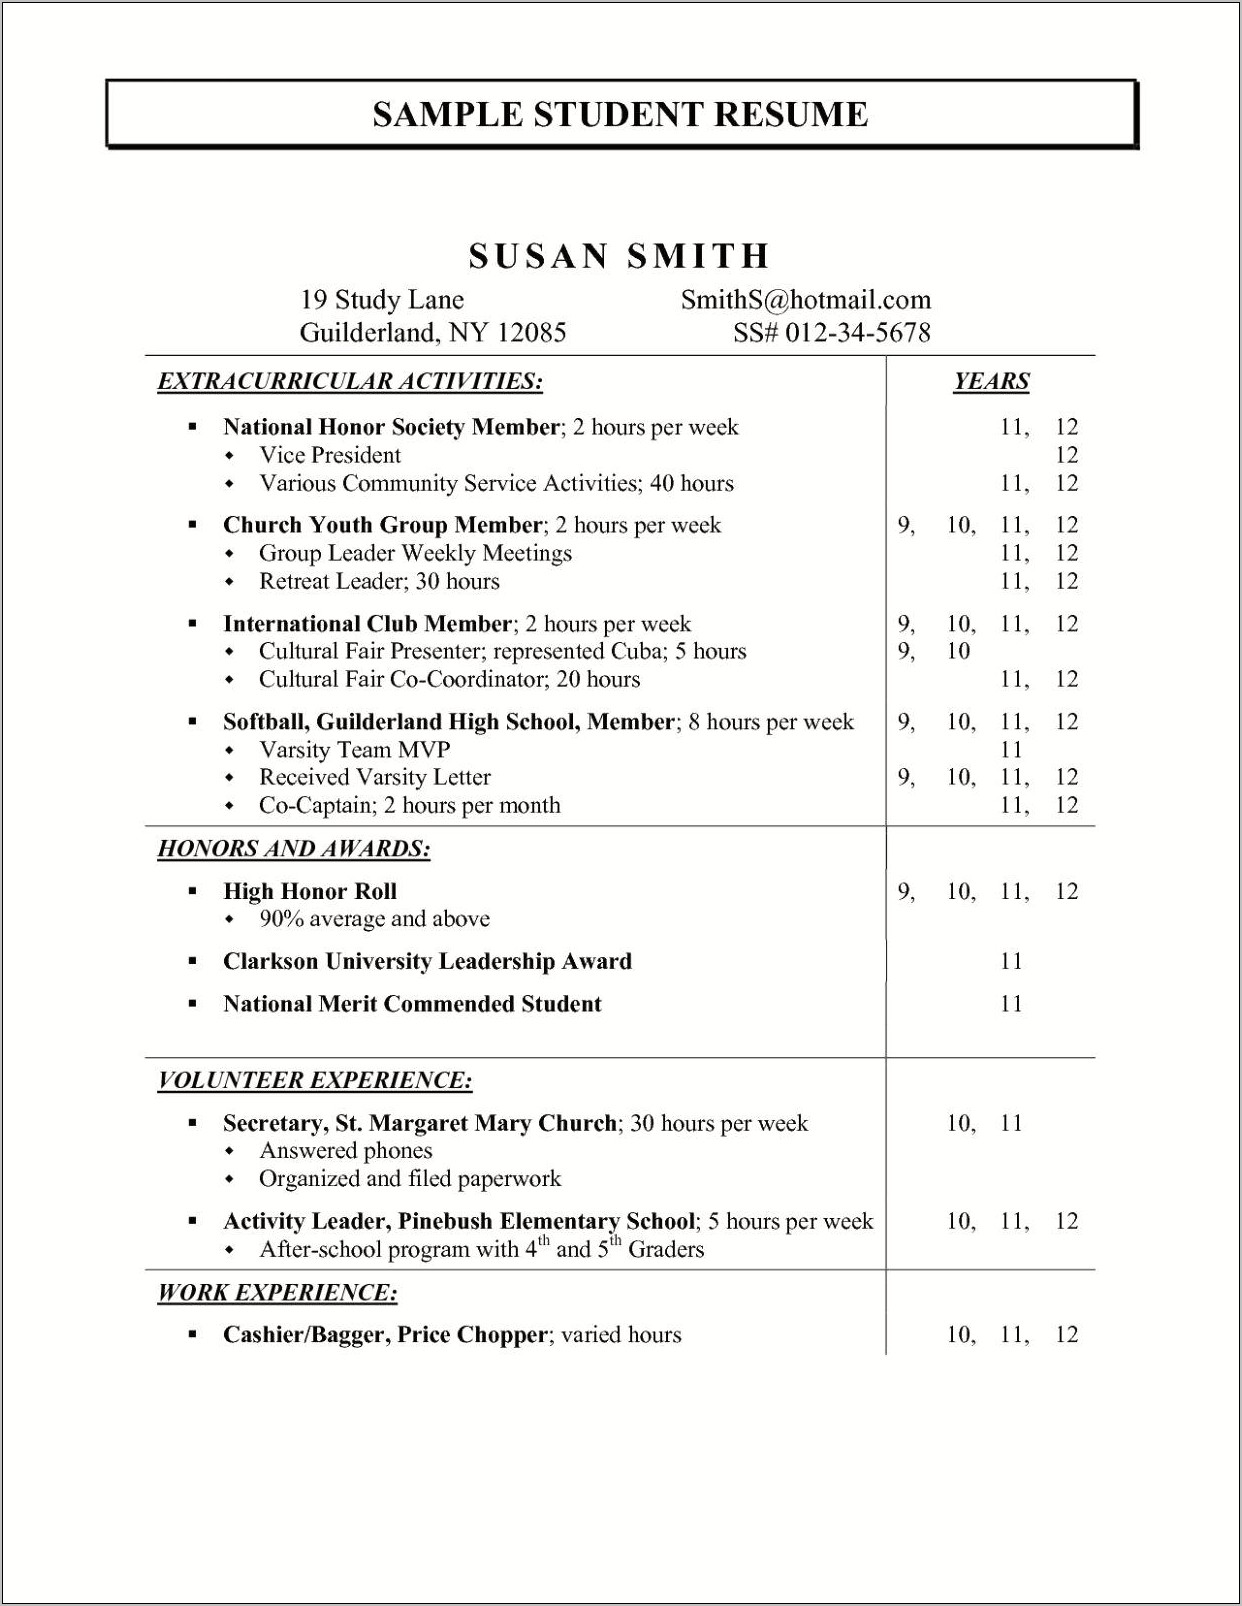 Good Extracurricular Activities To List For Resumes